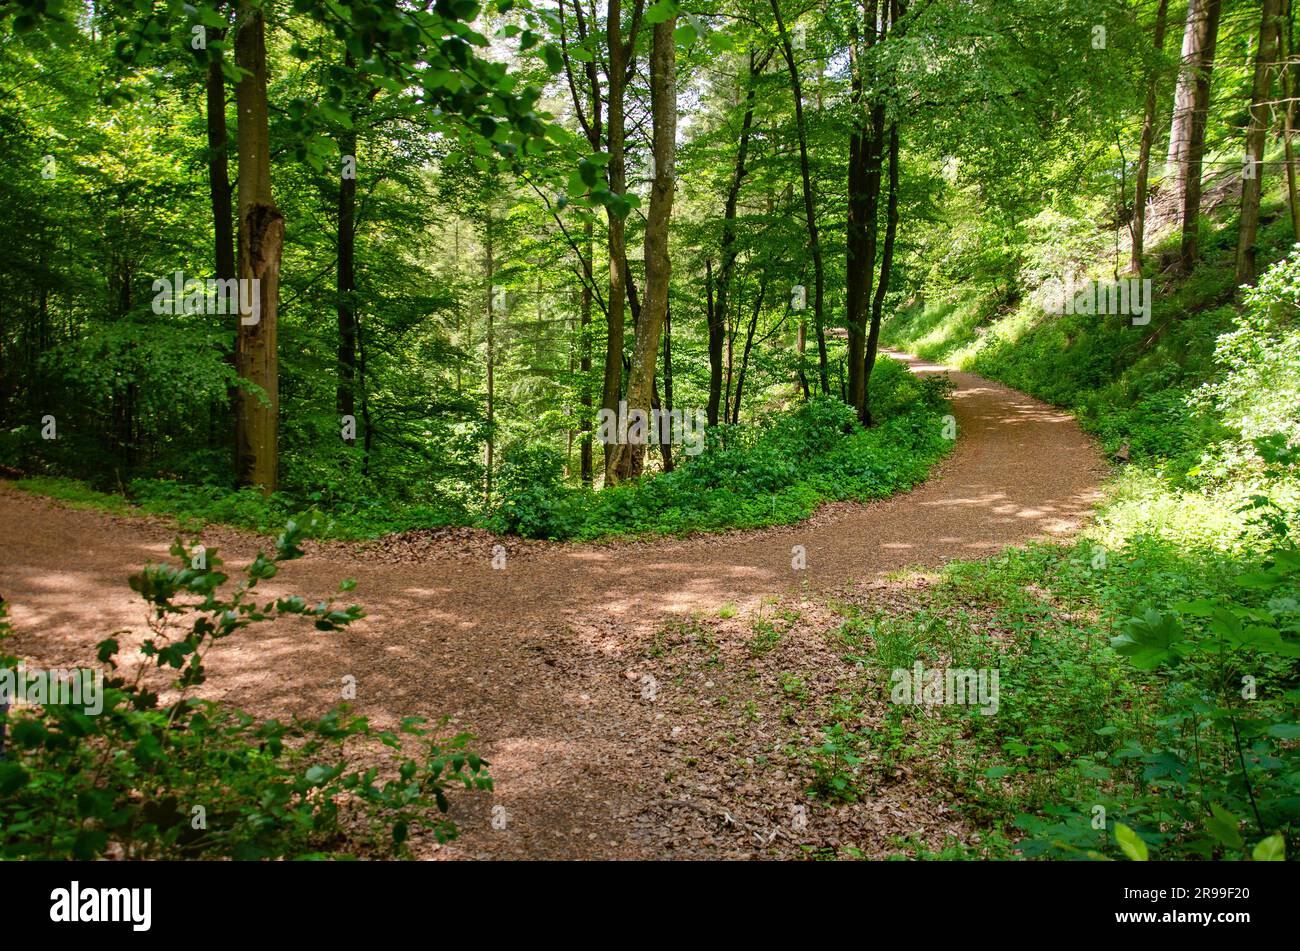 Curving footpath following the elevation lines in a forest near the volcanic lakes of Daun, Germany Stock Photo